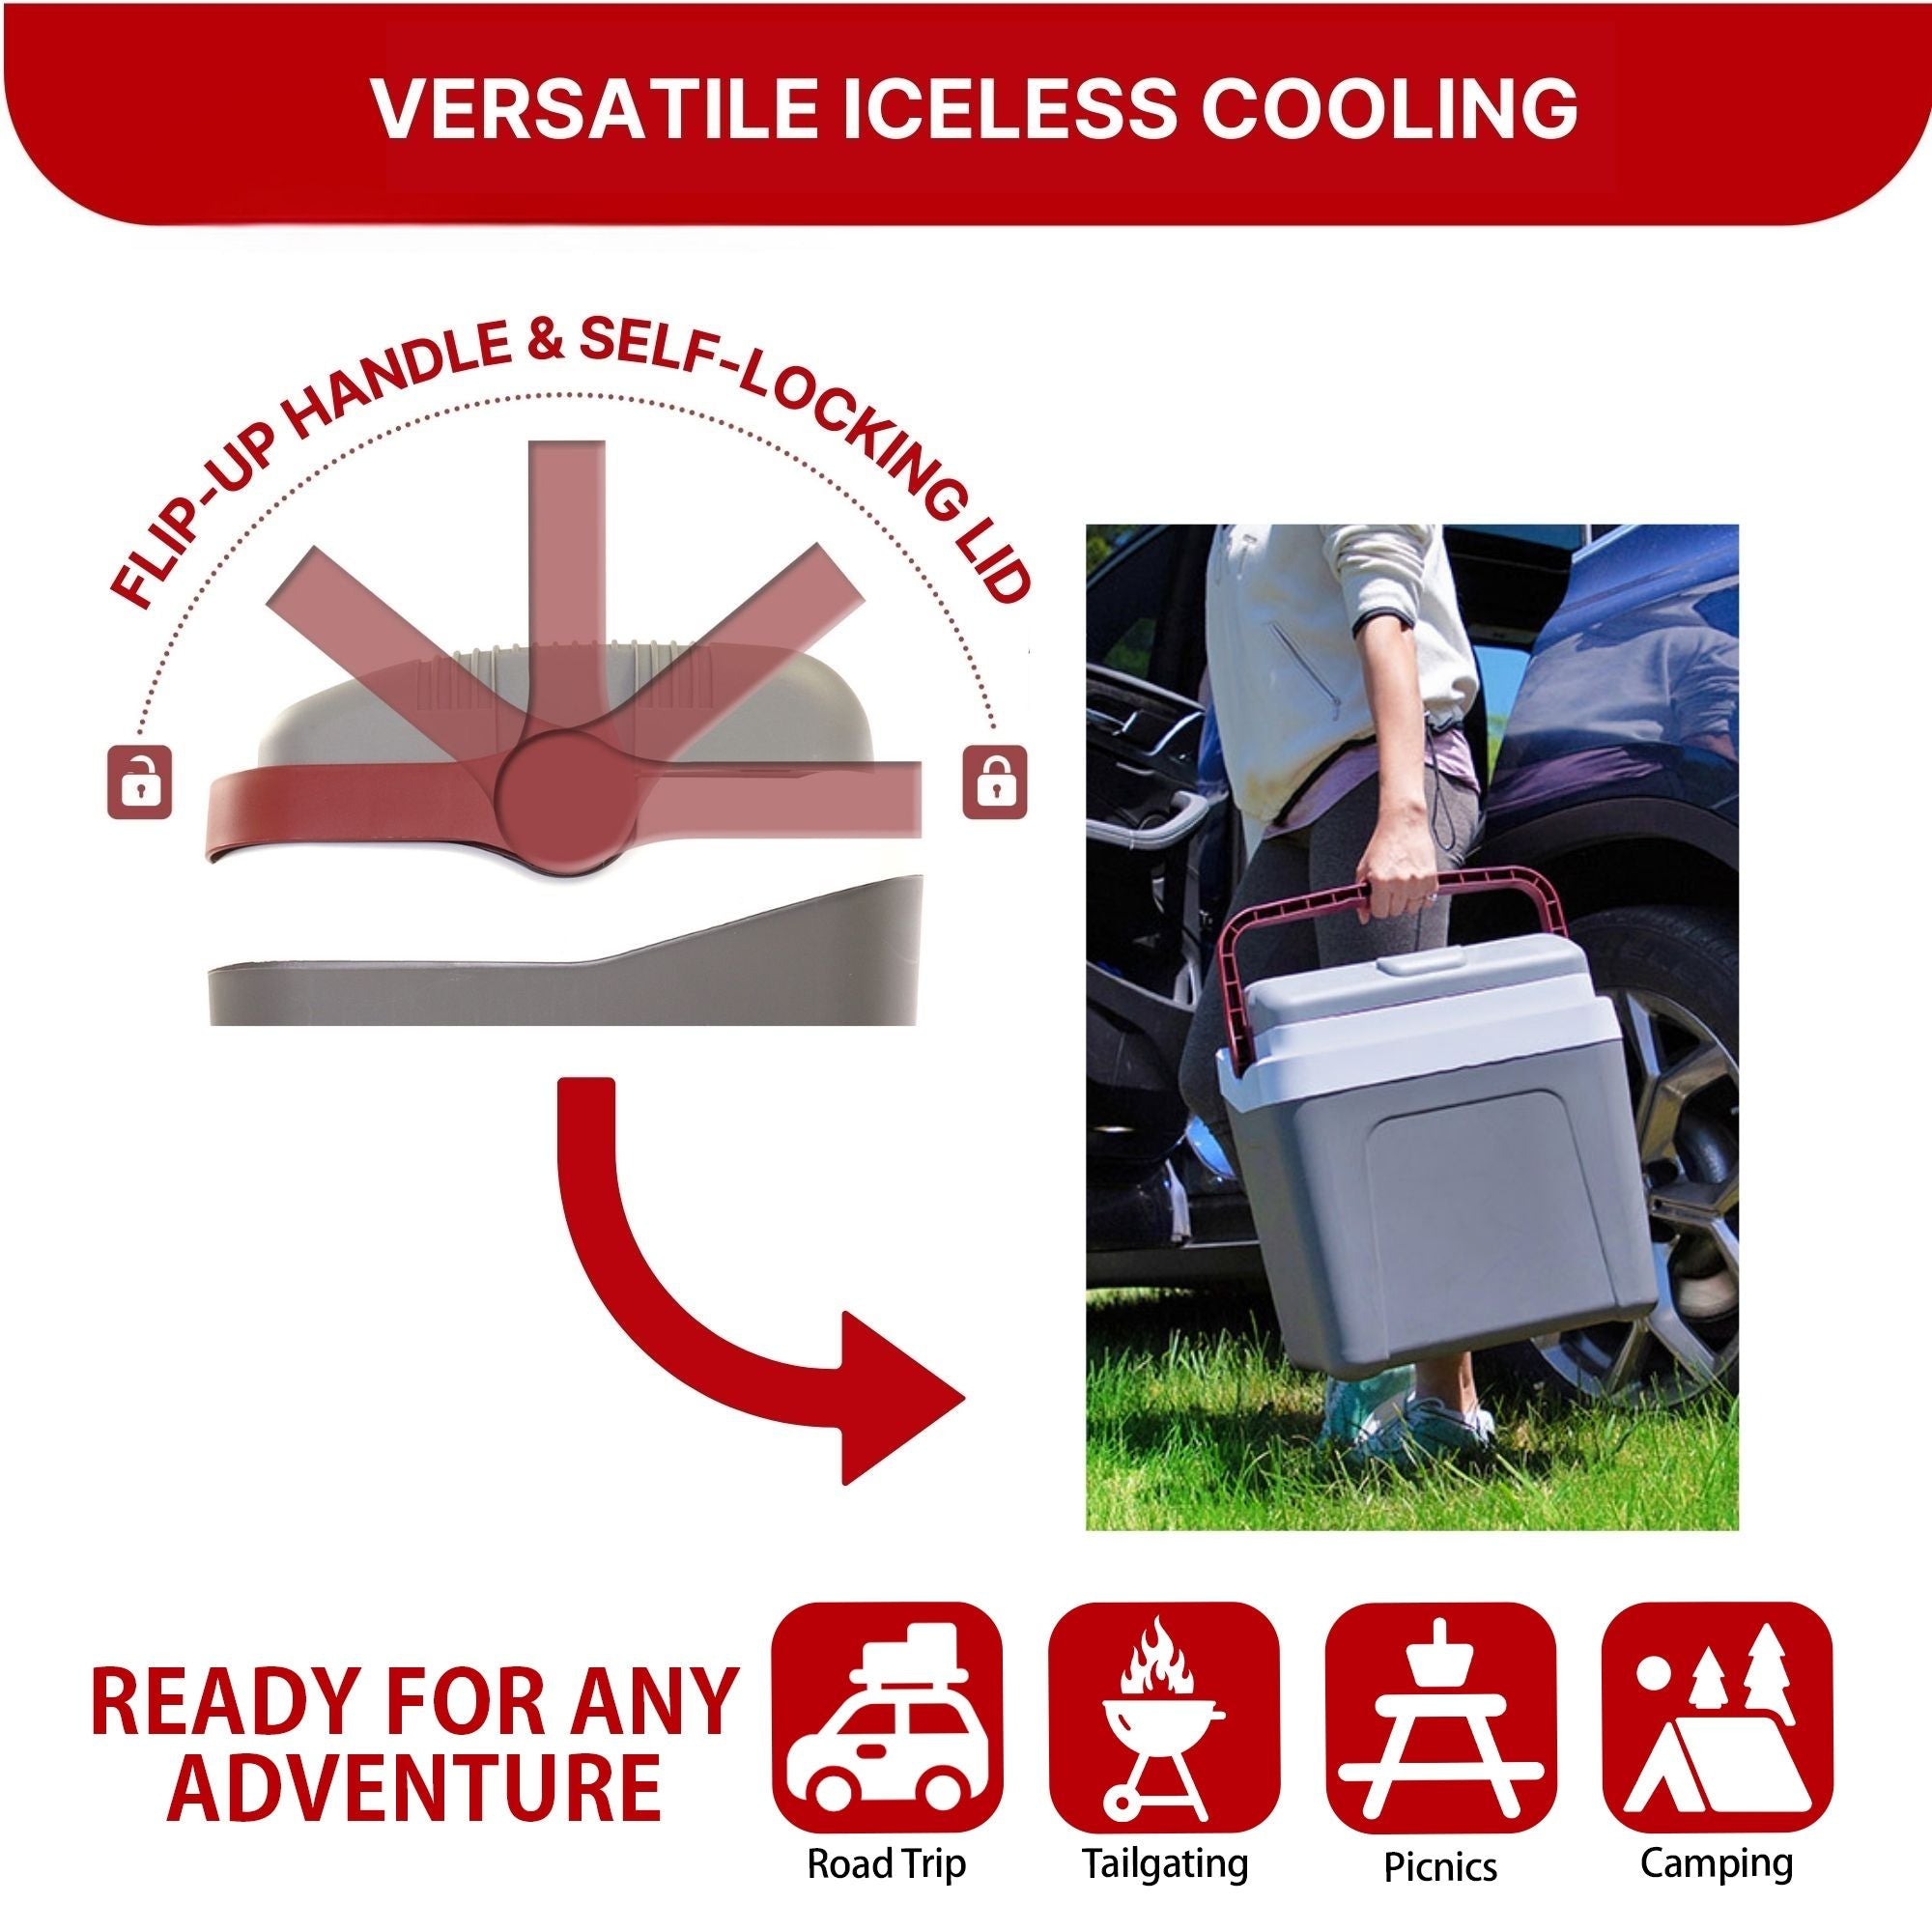 Side-by-side images show the carry handle in locked and unlocked positions, captioned, "flip-up handle & self-locking lid," and a person carrying the Kooaltron 12 volt cooler. Text above reads, "VERSATILE ICELESS COOLING." Text below reads, "READY FOR ANY ADVENTURE" followed by icons labeled: Road trip, tailgating, picnics, and camping.